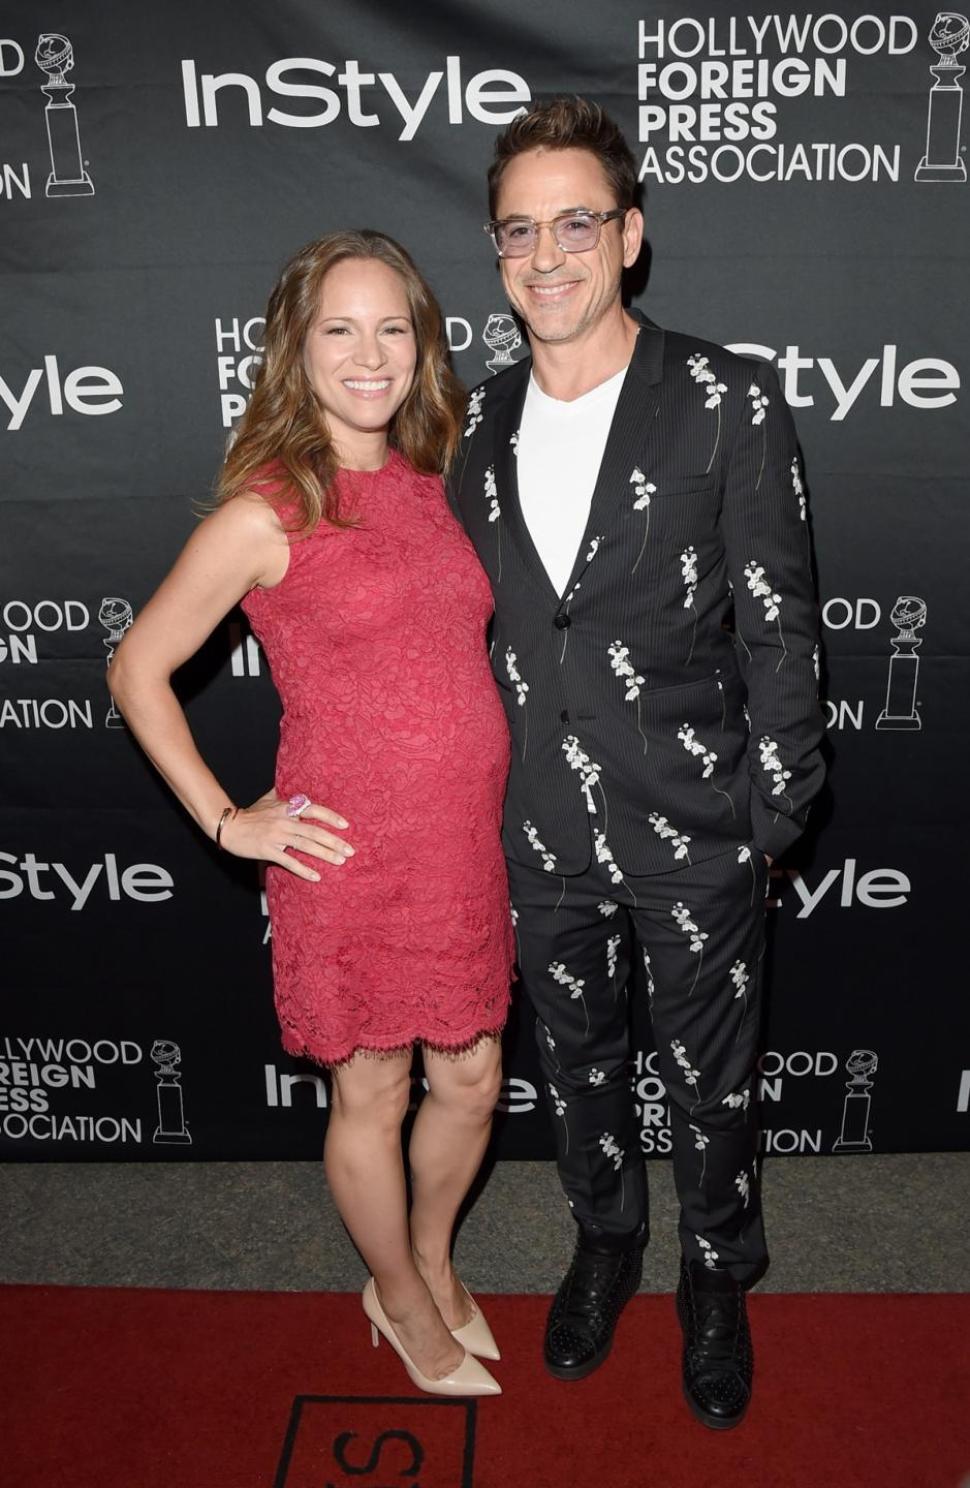 Robert Downey Jr. and Susan Downey (seen at the 2014 Toronto International Film Festival in September) have reportedly welcomed their second child.